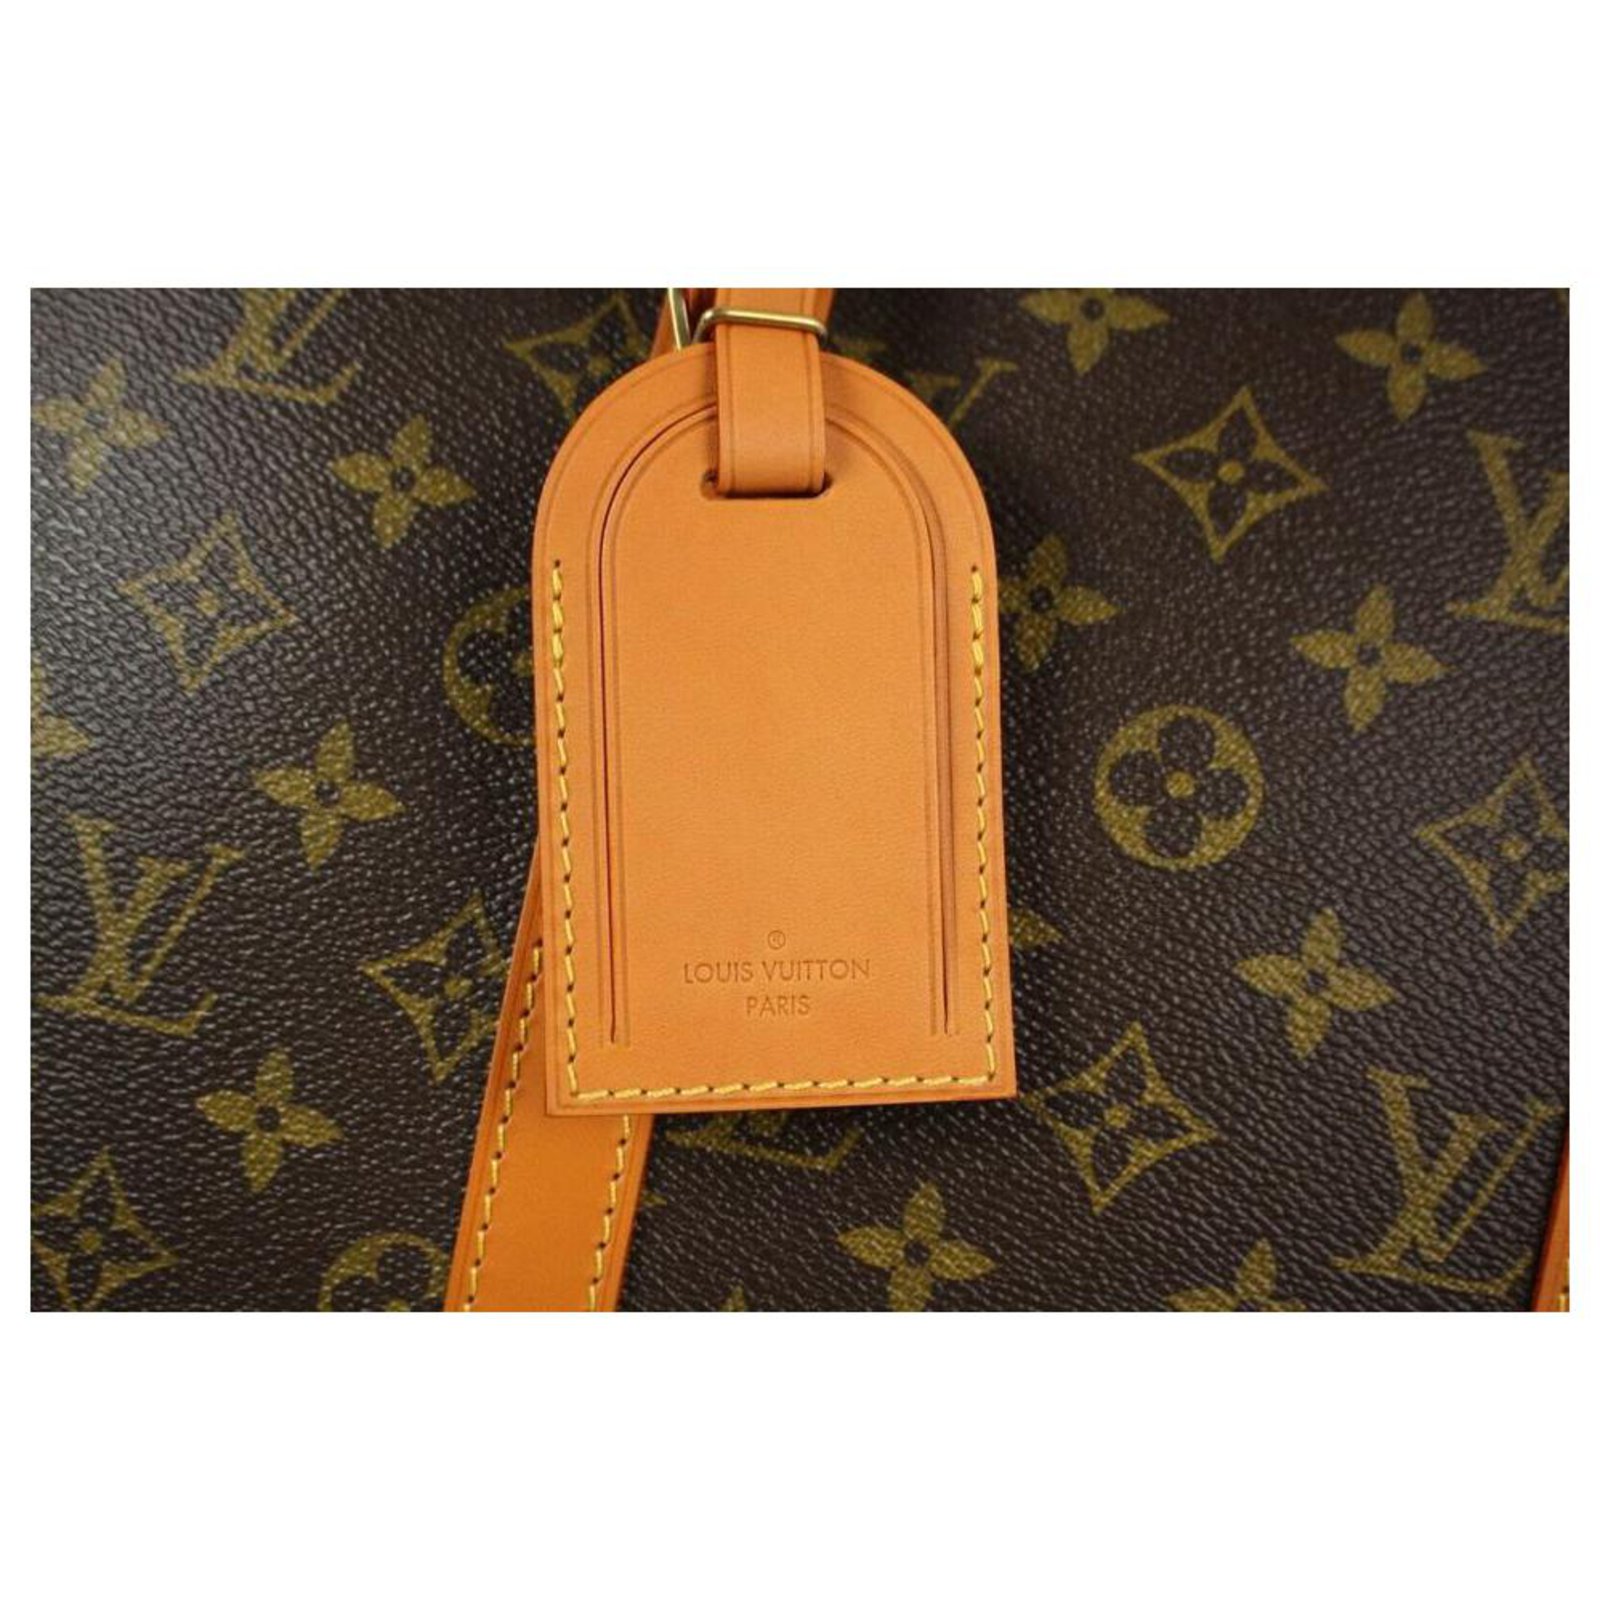 Louis Vuitton Karl Lagerfeld Ultra Rare Limited Monogram Boxing Glove –  Bagriculture